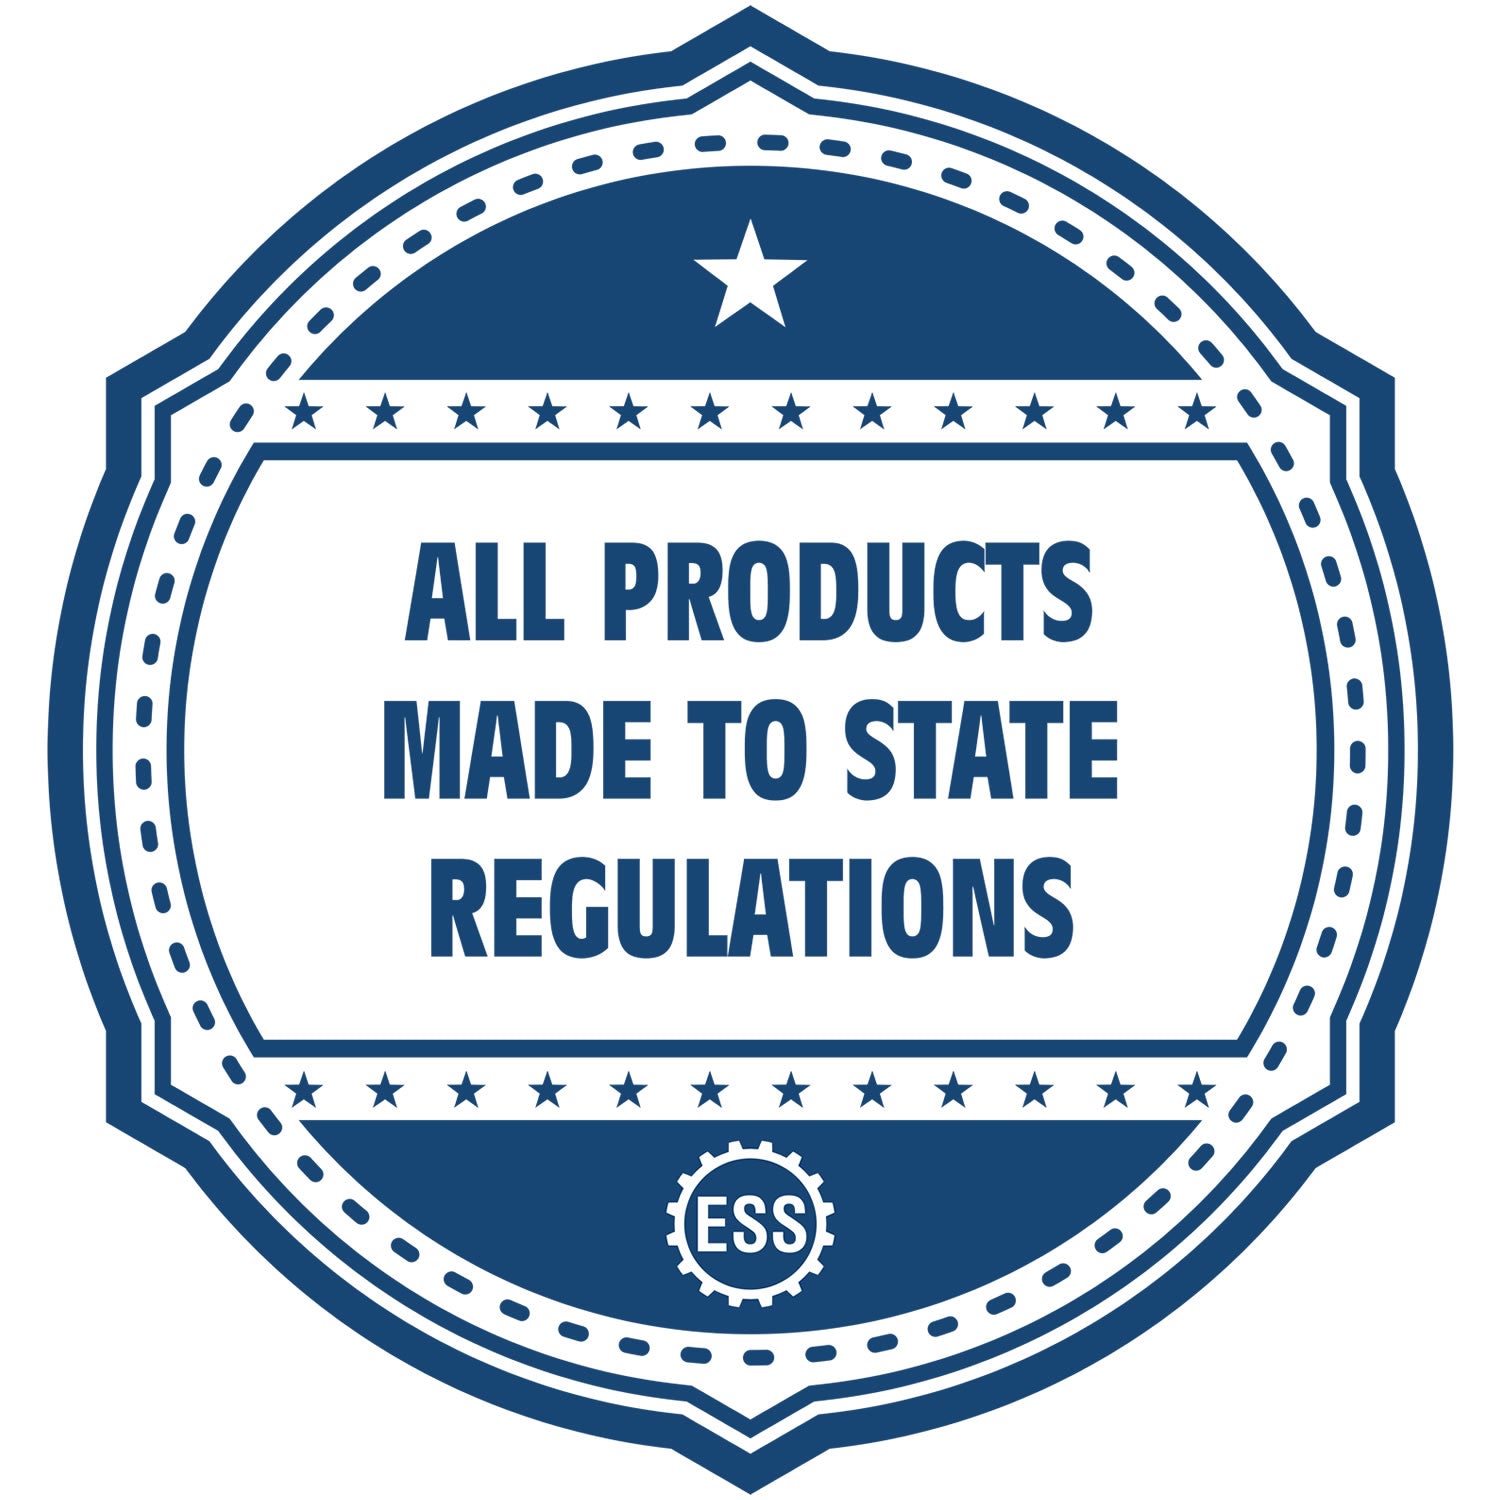 An icon or badge element for the State of Arkansas Architectural Seal Embosser showing that this product is made in compliance with state regulations.